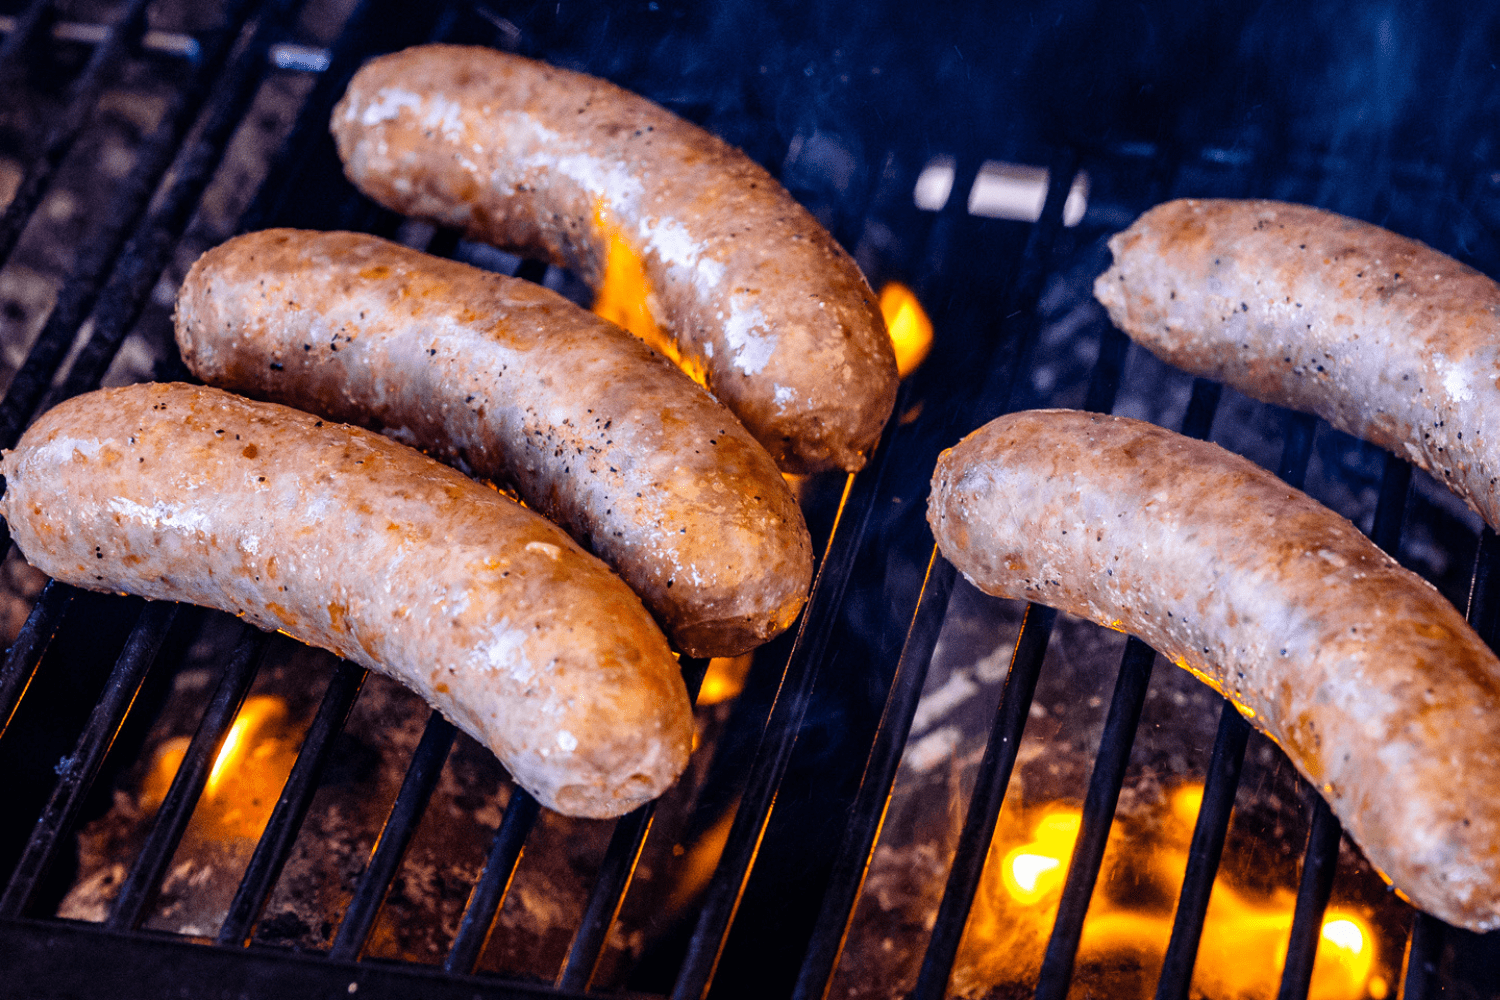 How to Grill Sausage